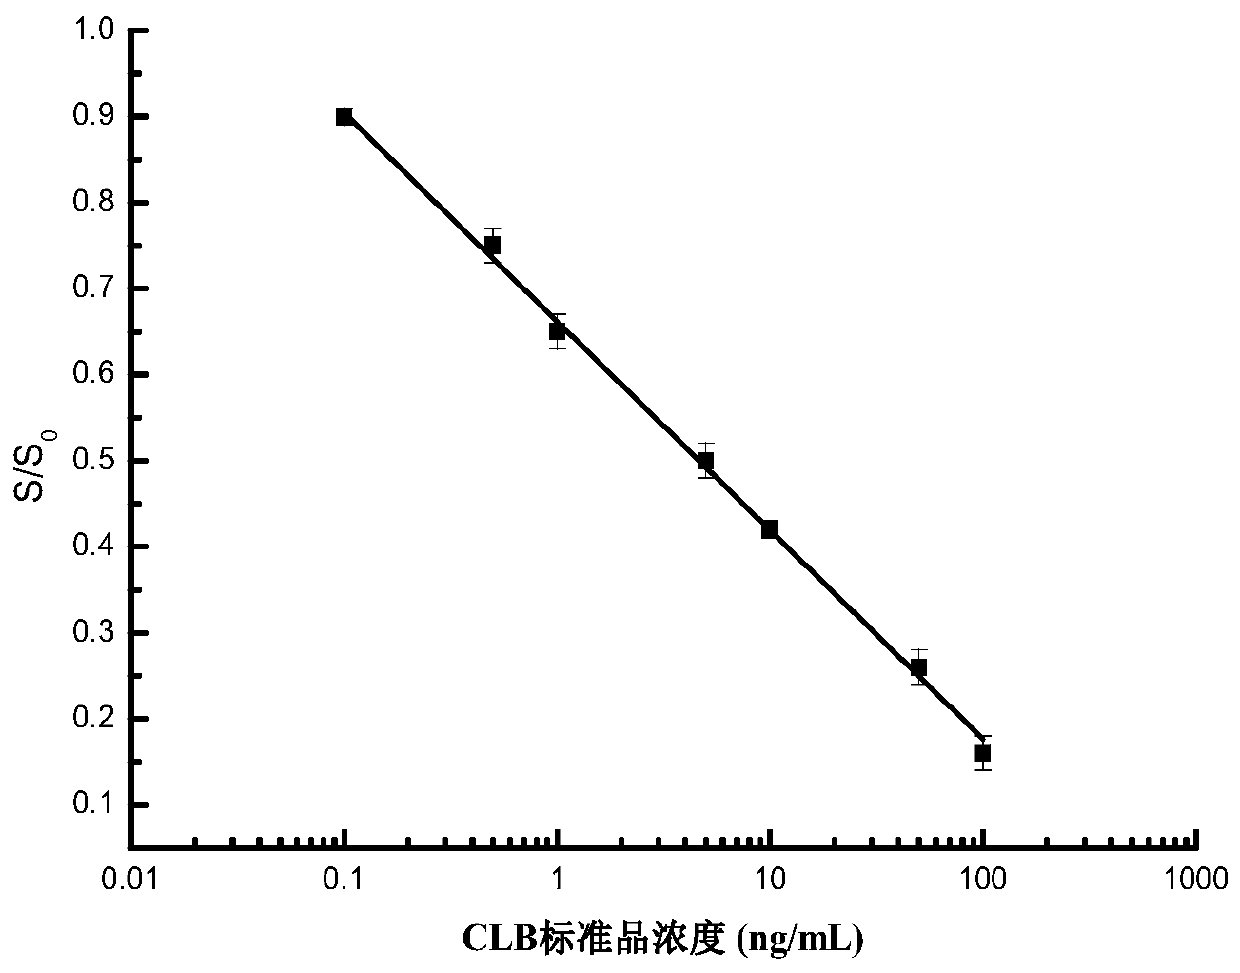 A method for detecting clenbuterol hydrochloride residues based on a blood glucose meter